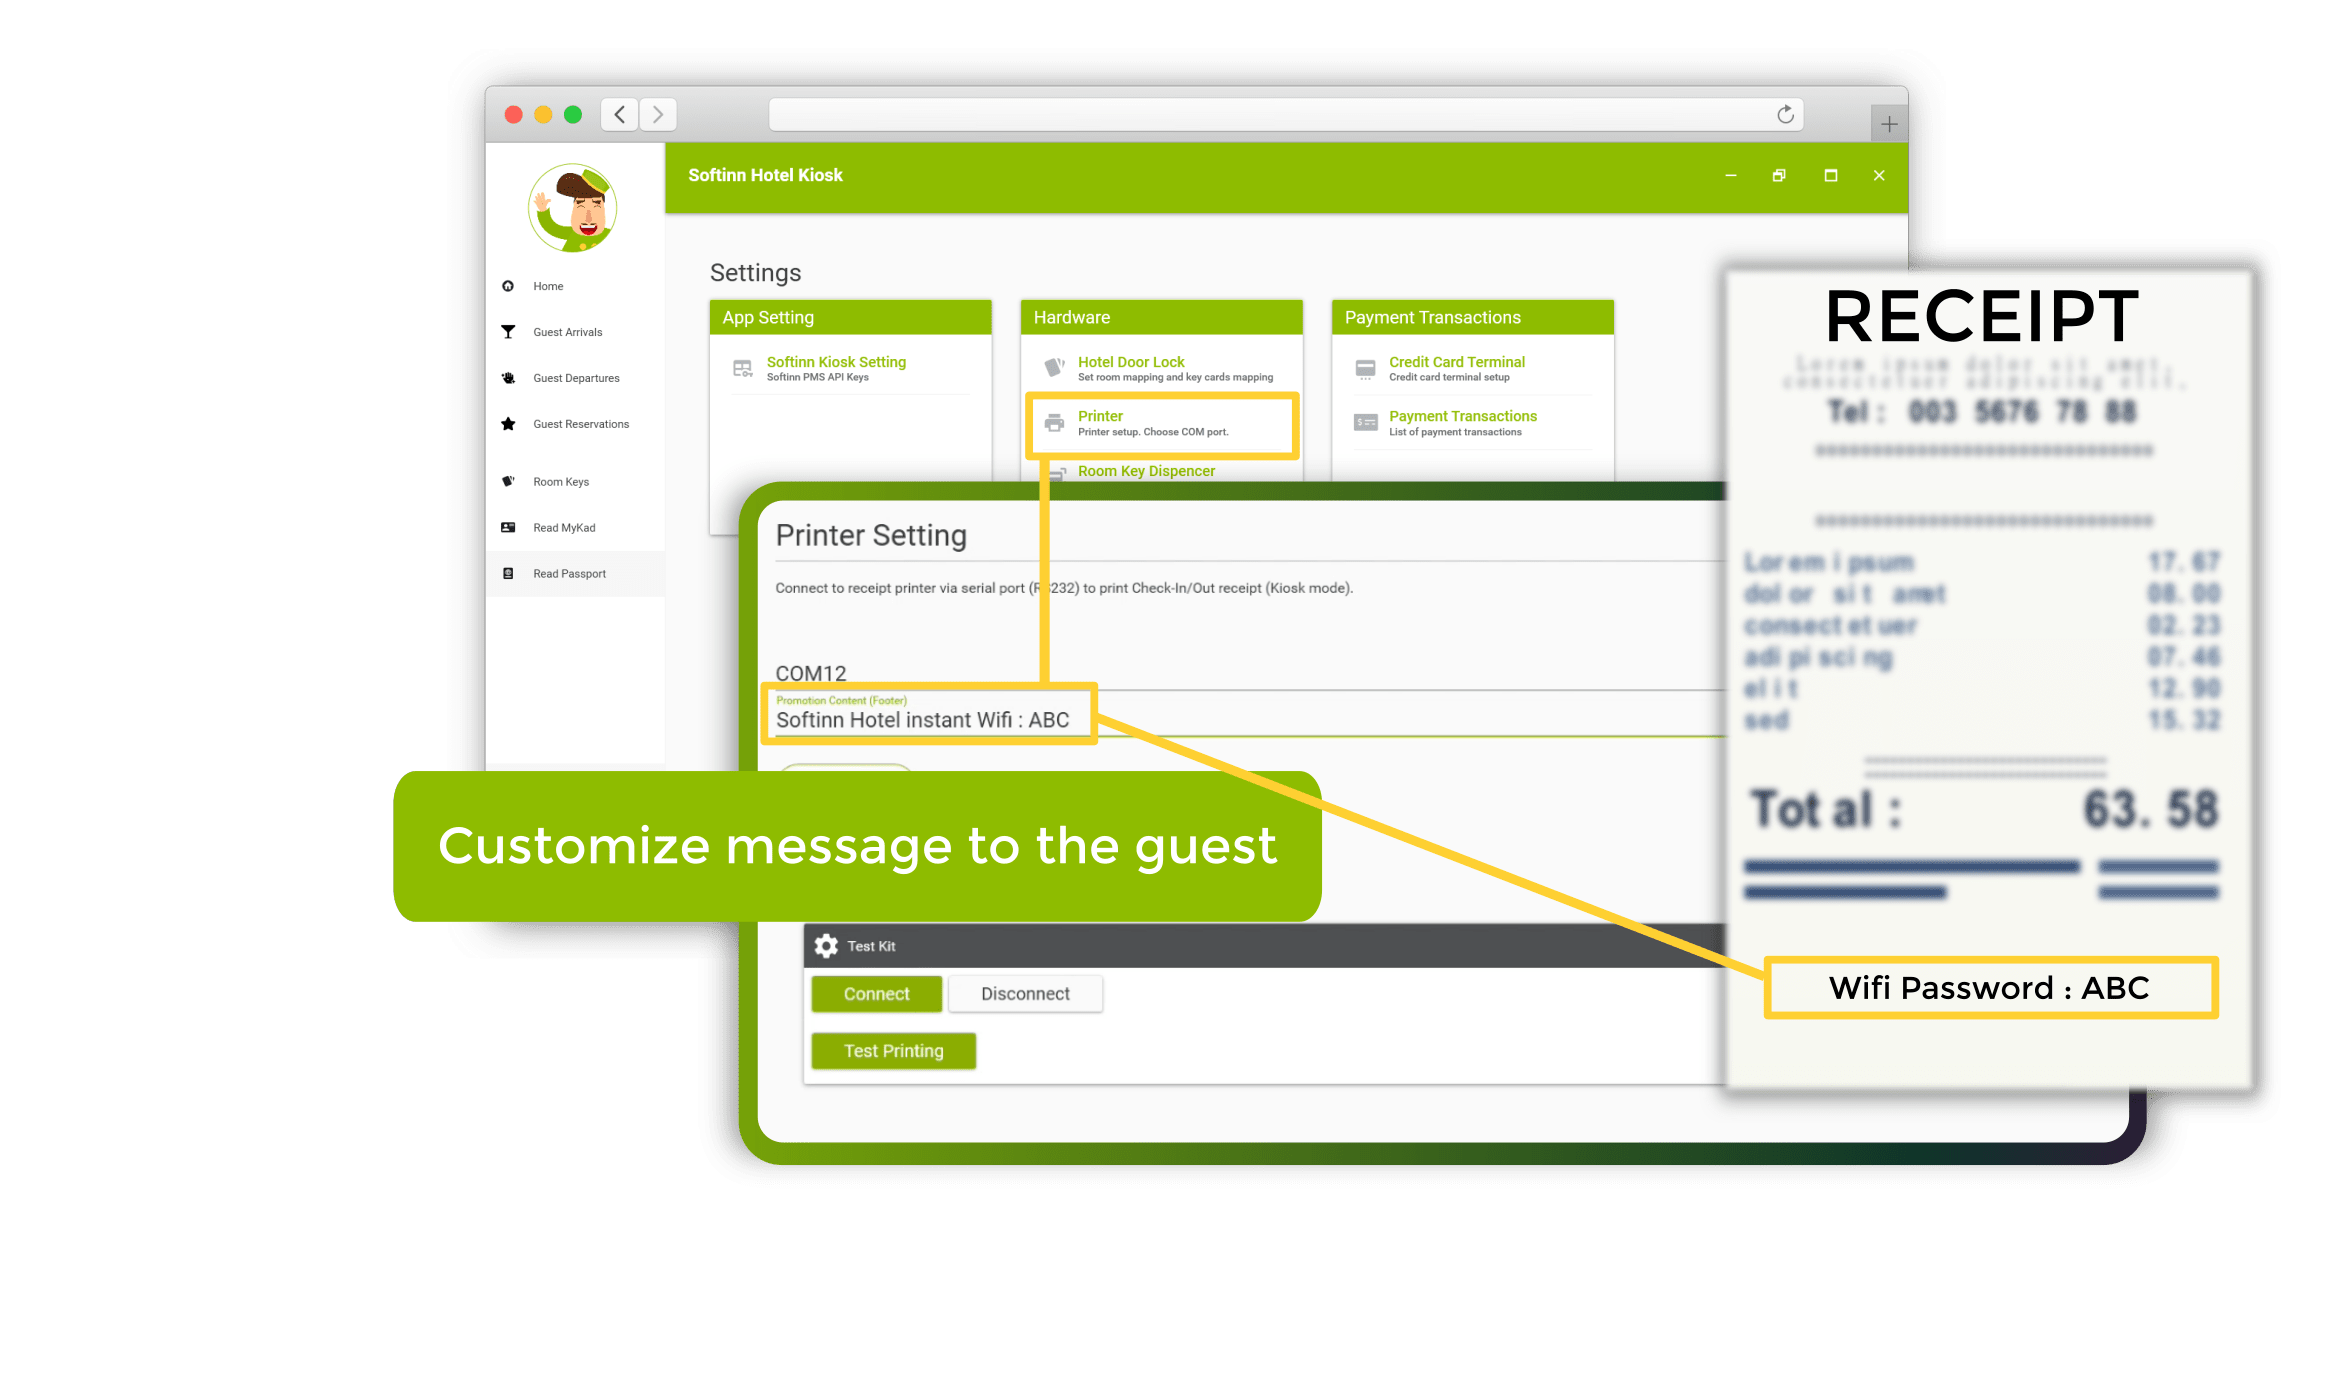 Customize message to the guest